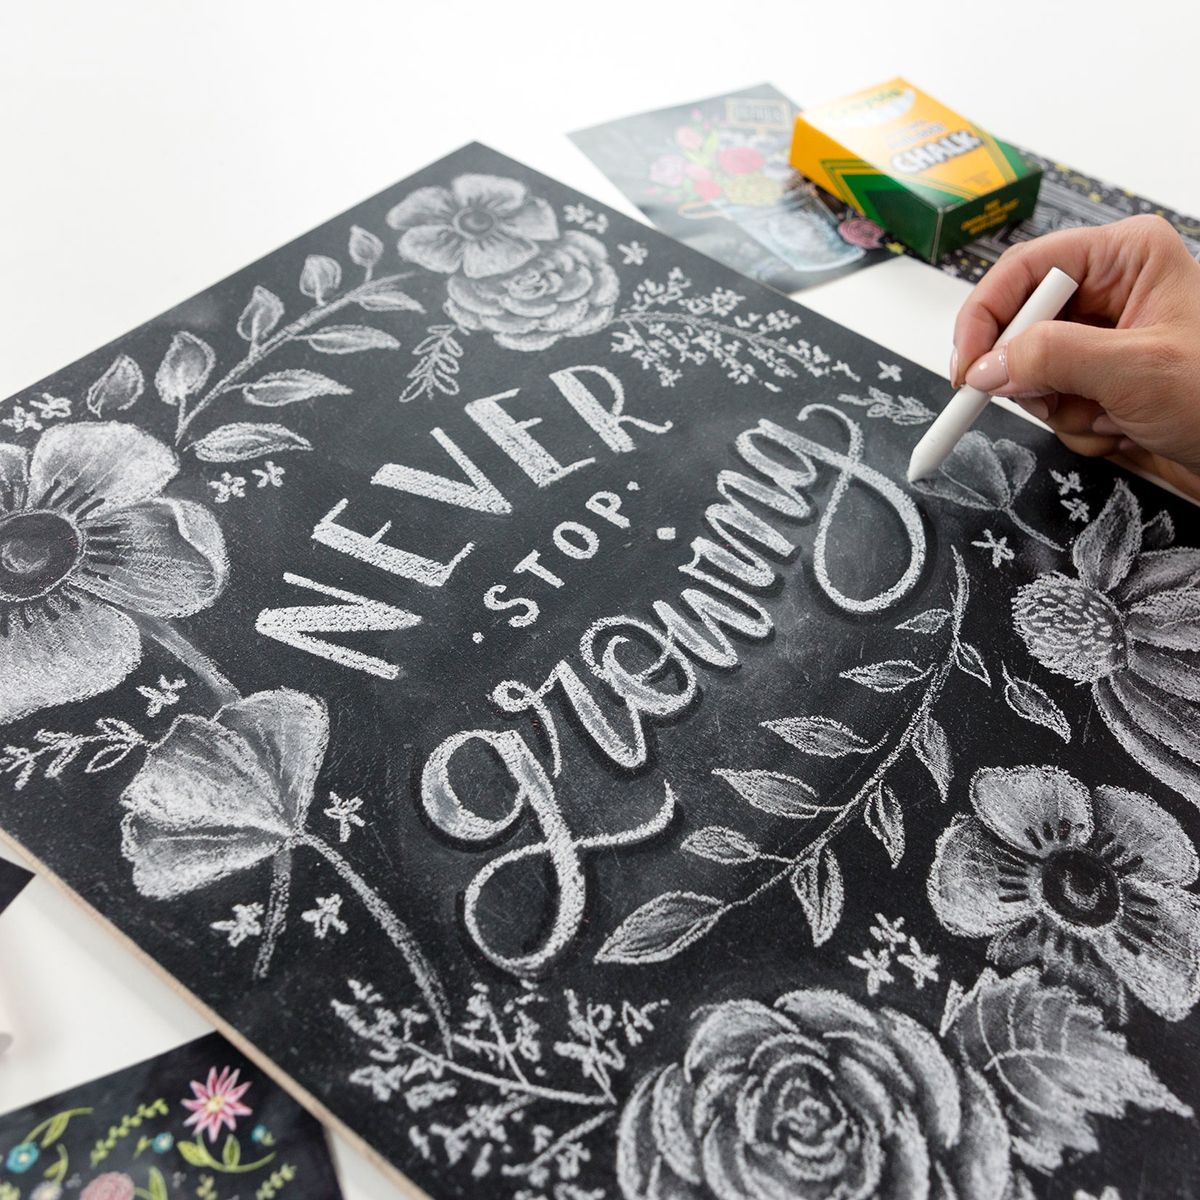 These 10 Lettering Classes Bring Back the Art of Handwriting